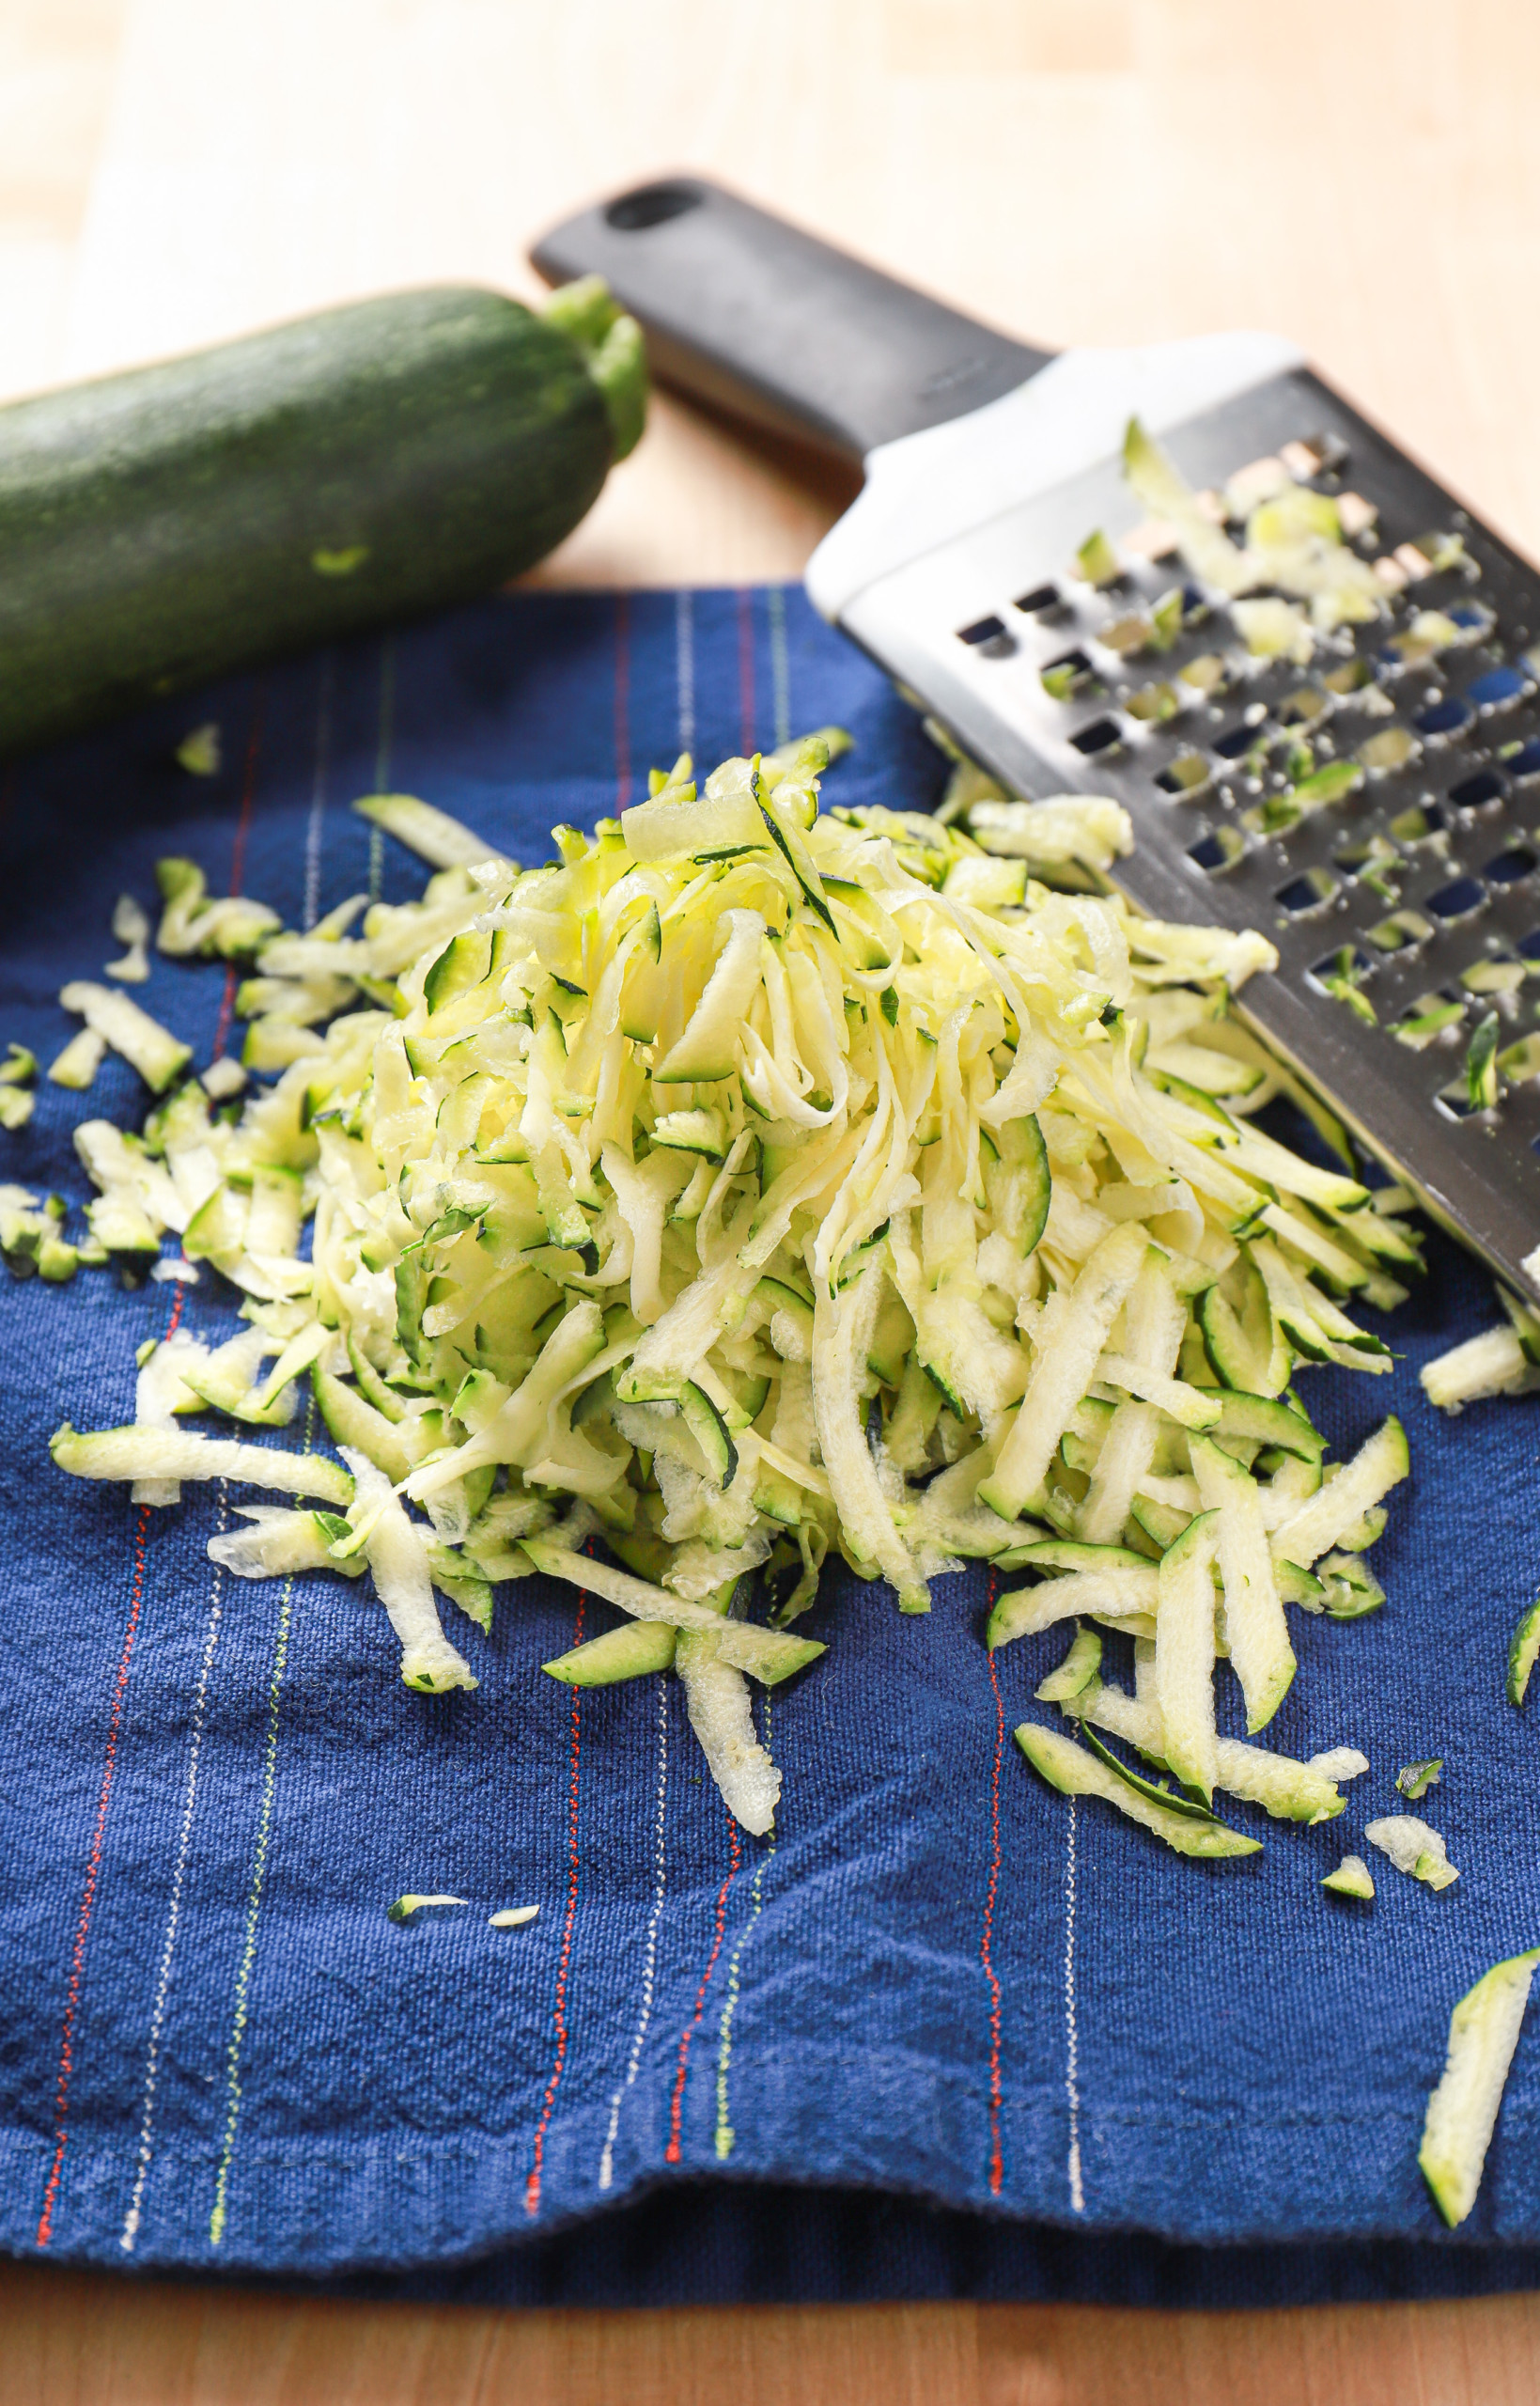 Shredded zucchini on a dark blue towel with a grater and zucchini in the background.